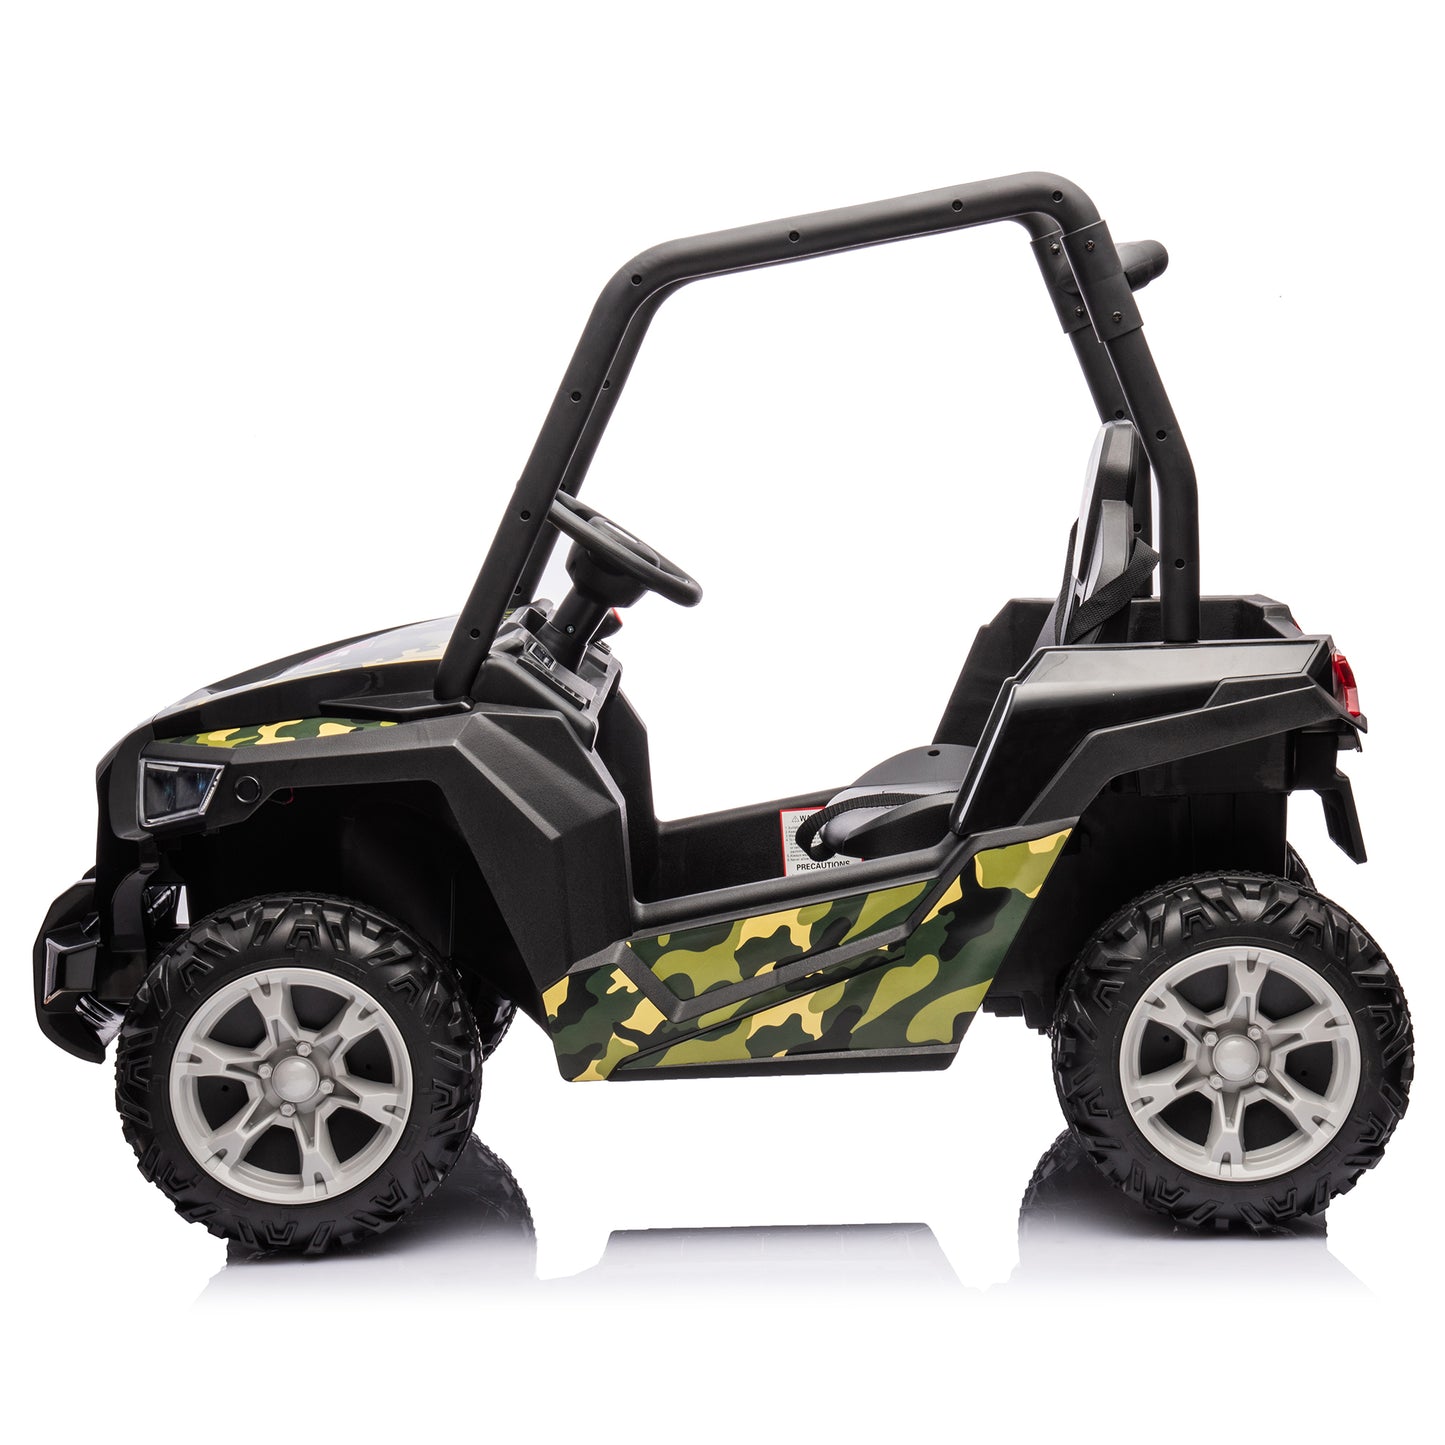 12V Dual-drive remote control electric Kid Ride On Car,Battery Powered Kids Ride-on Car Camouflage green, 4 Wheels Children toys vehicle
,LED Headlights,remote control,music,USB.